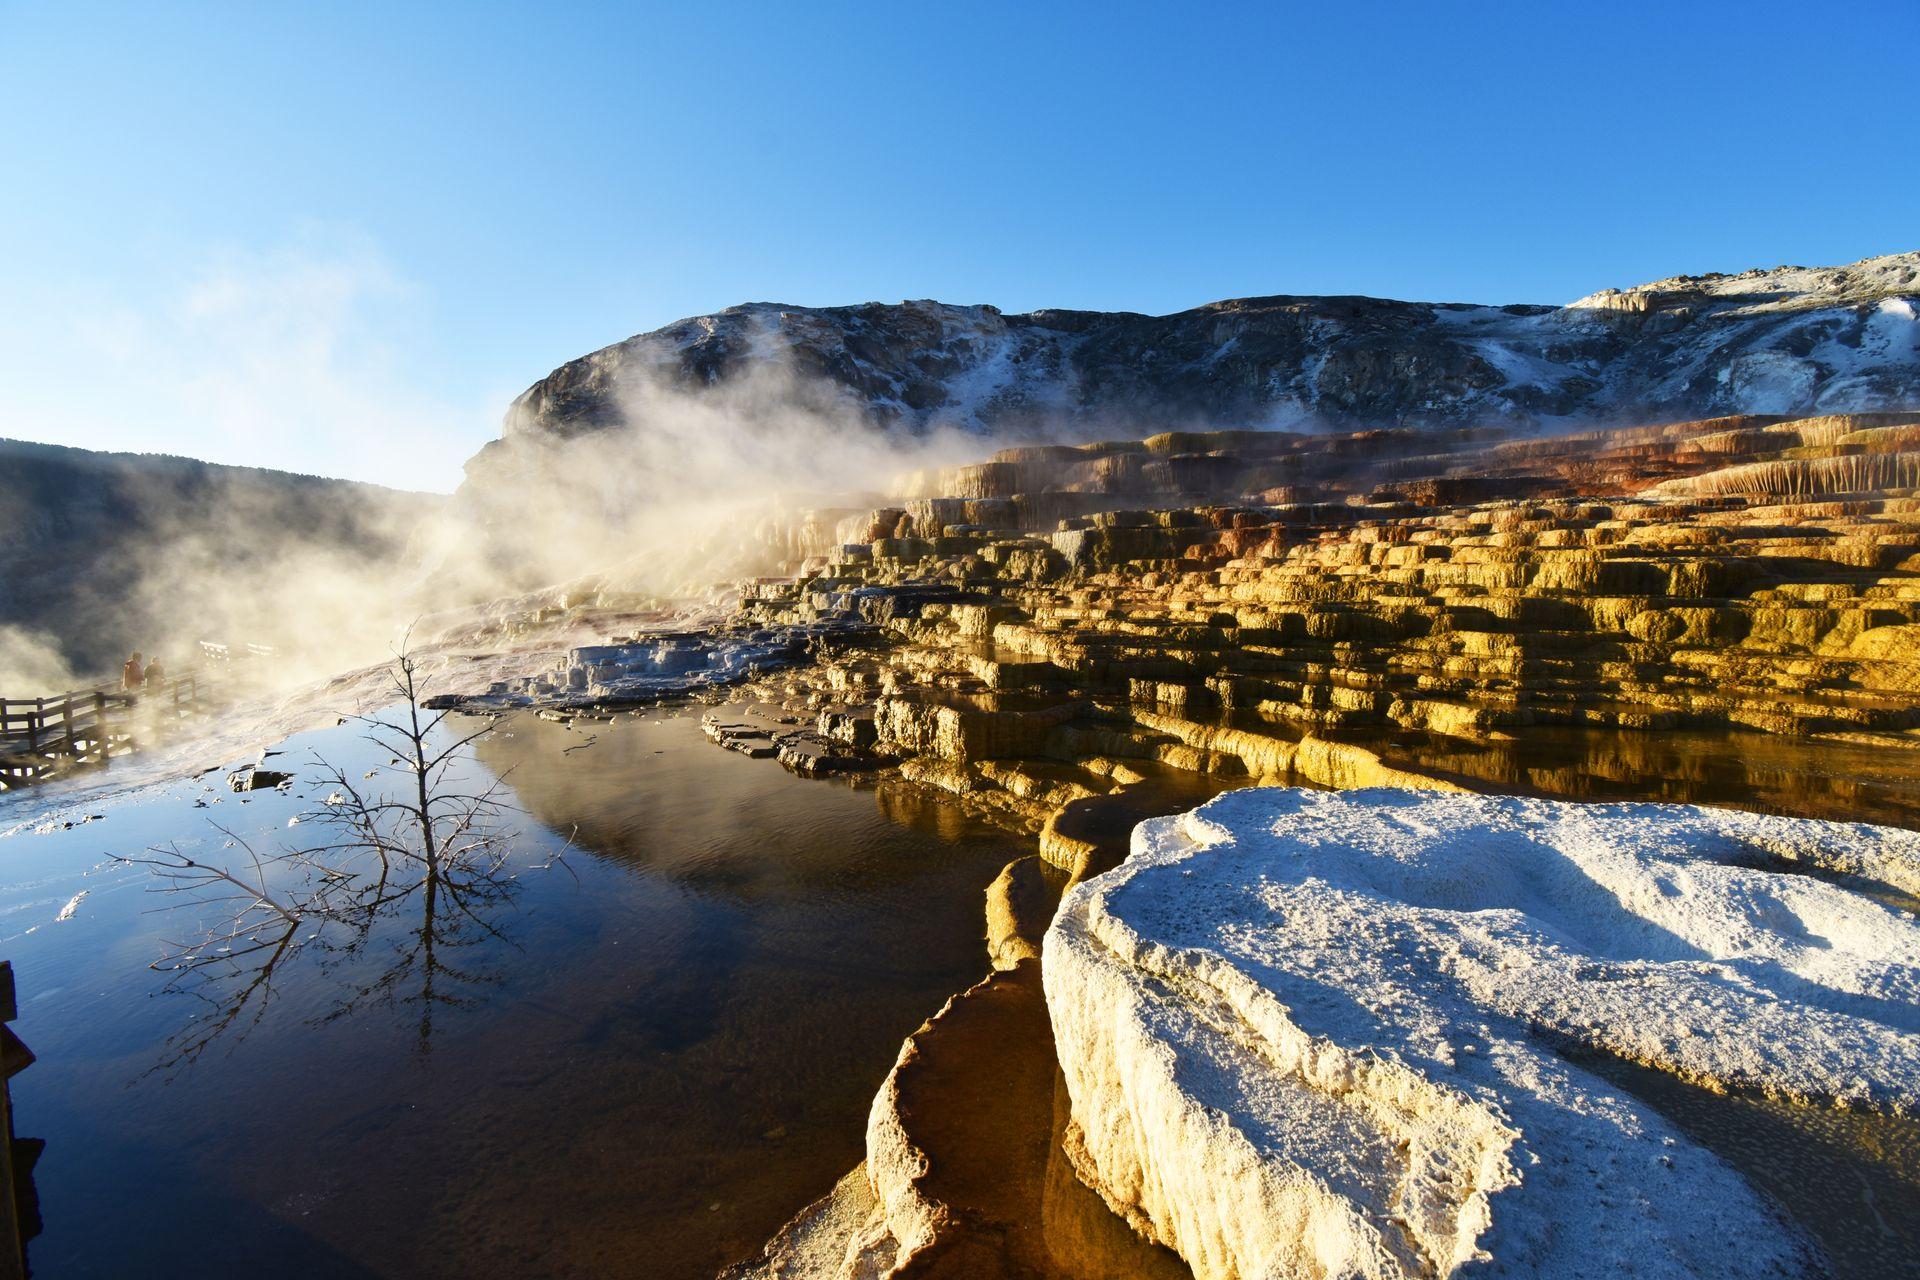 Sunrise lighting at Mammoth Hot Springs in Yellowstone National Park. These are layers of mineral deposits and steam coming off of the water.